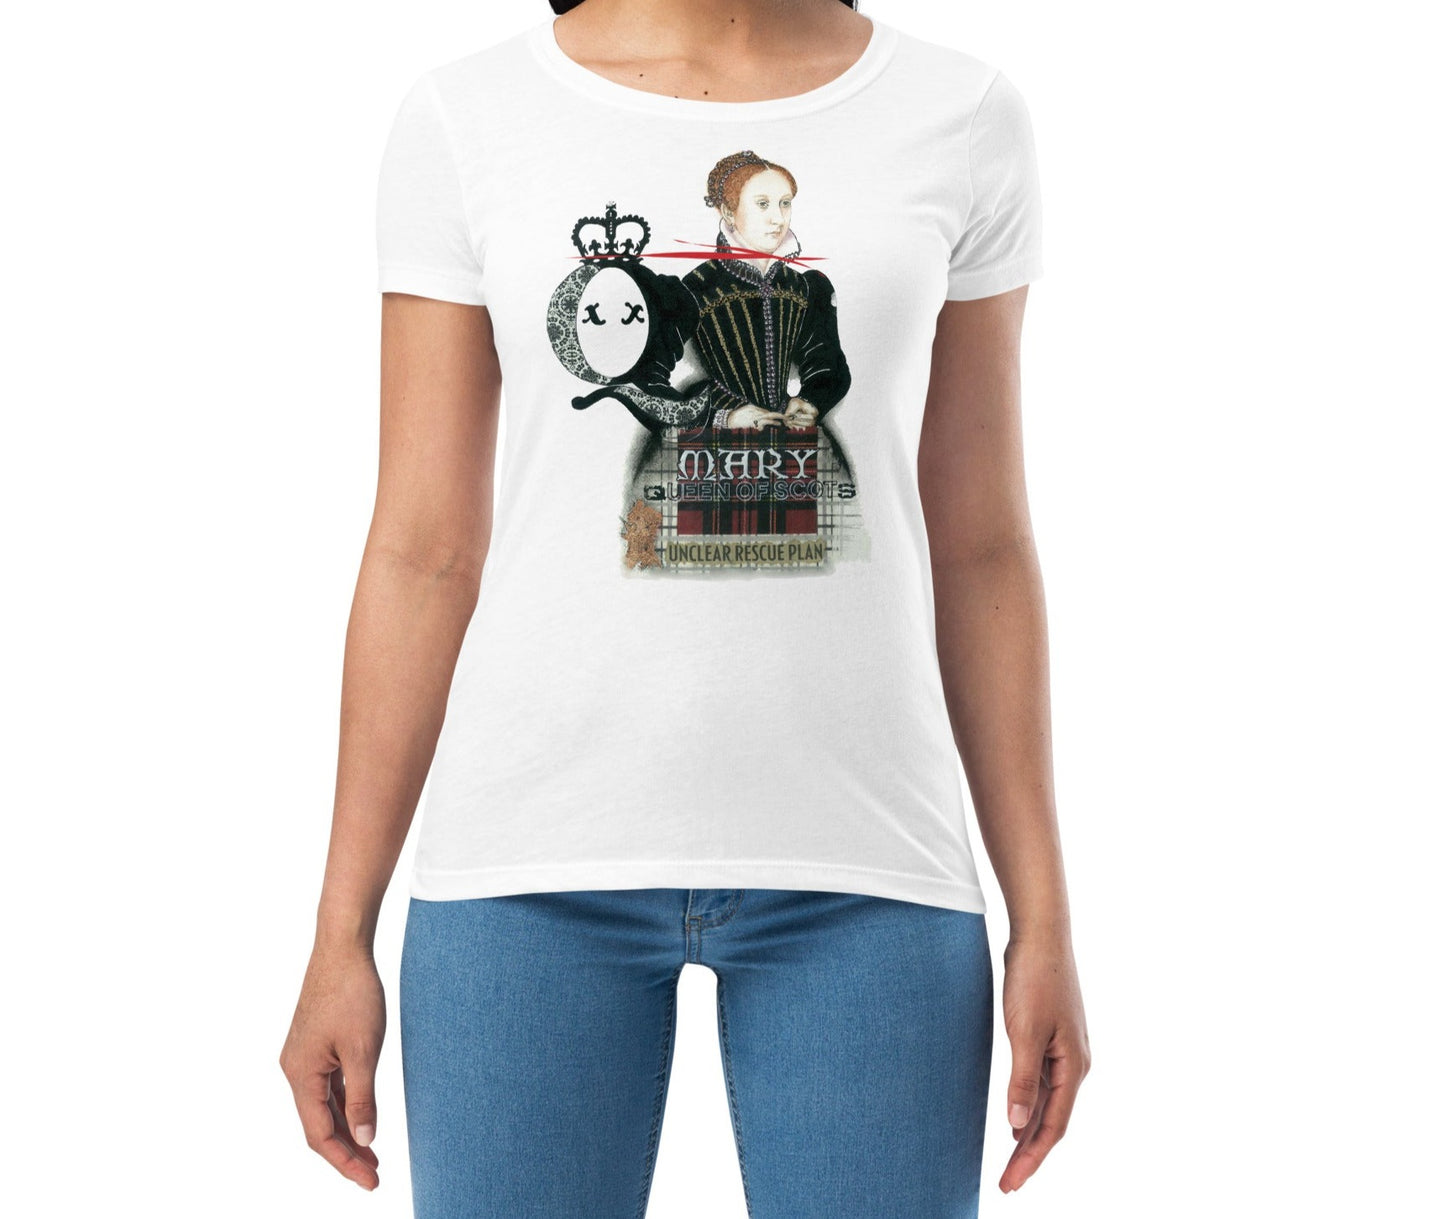 Mary Queen of Scots T-Shirt2